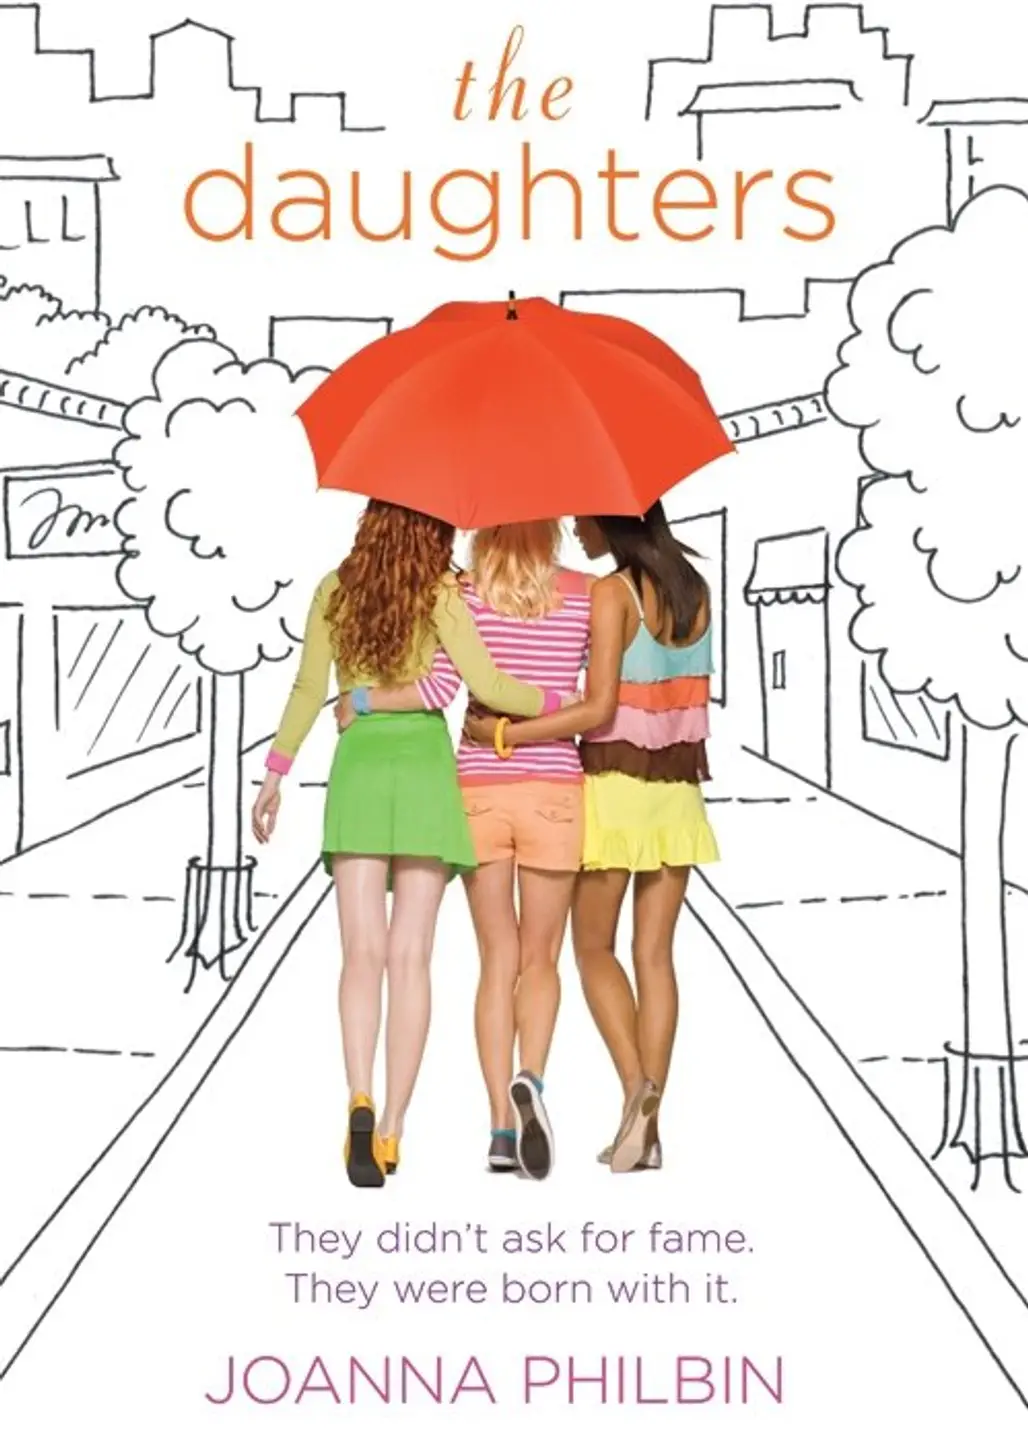 The Daughters Series by Joanna Philbin